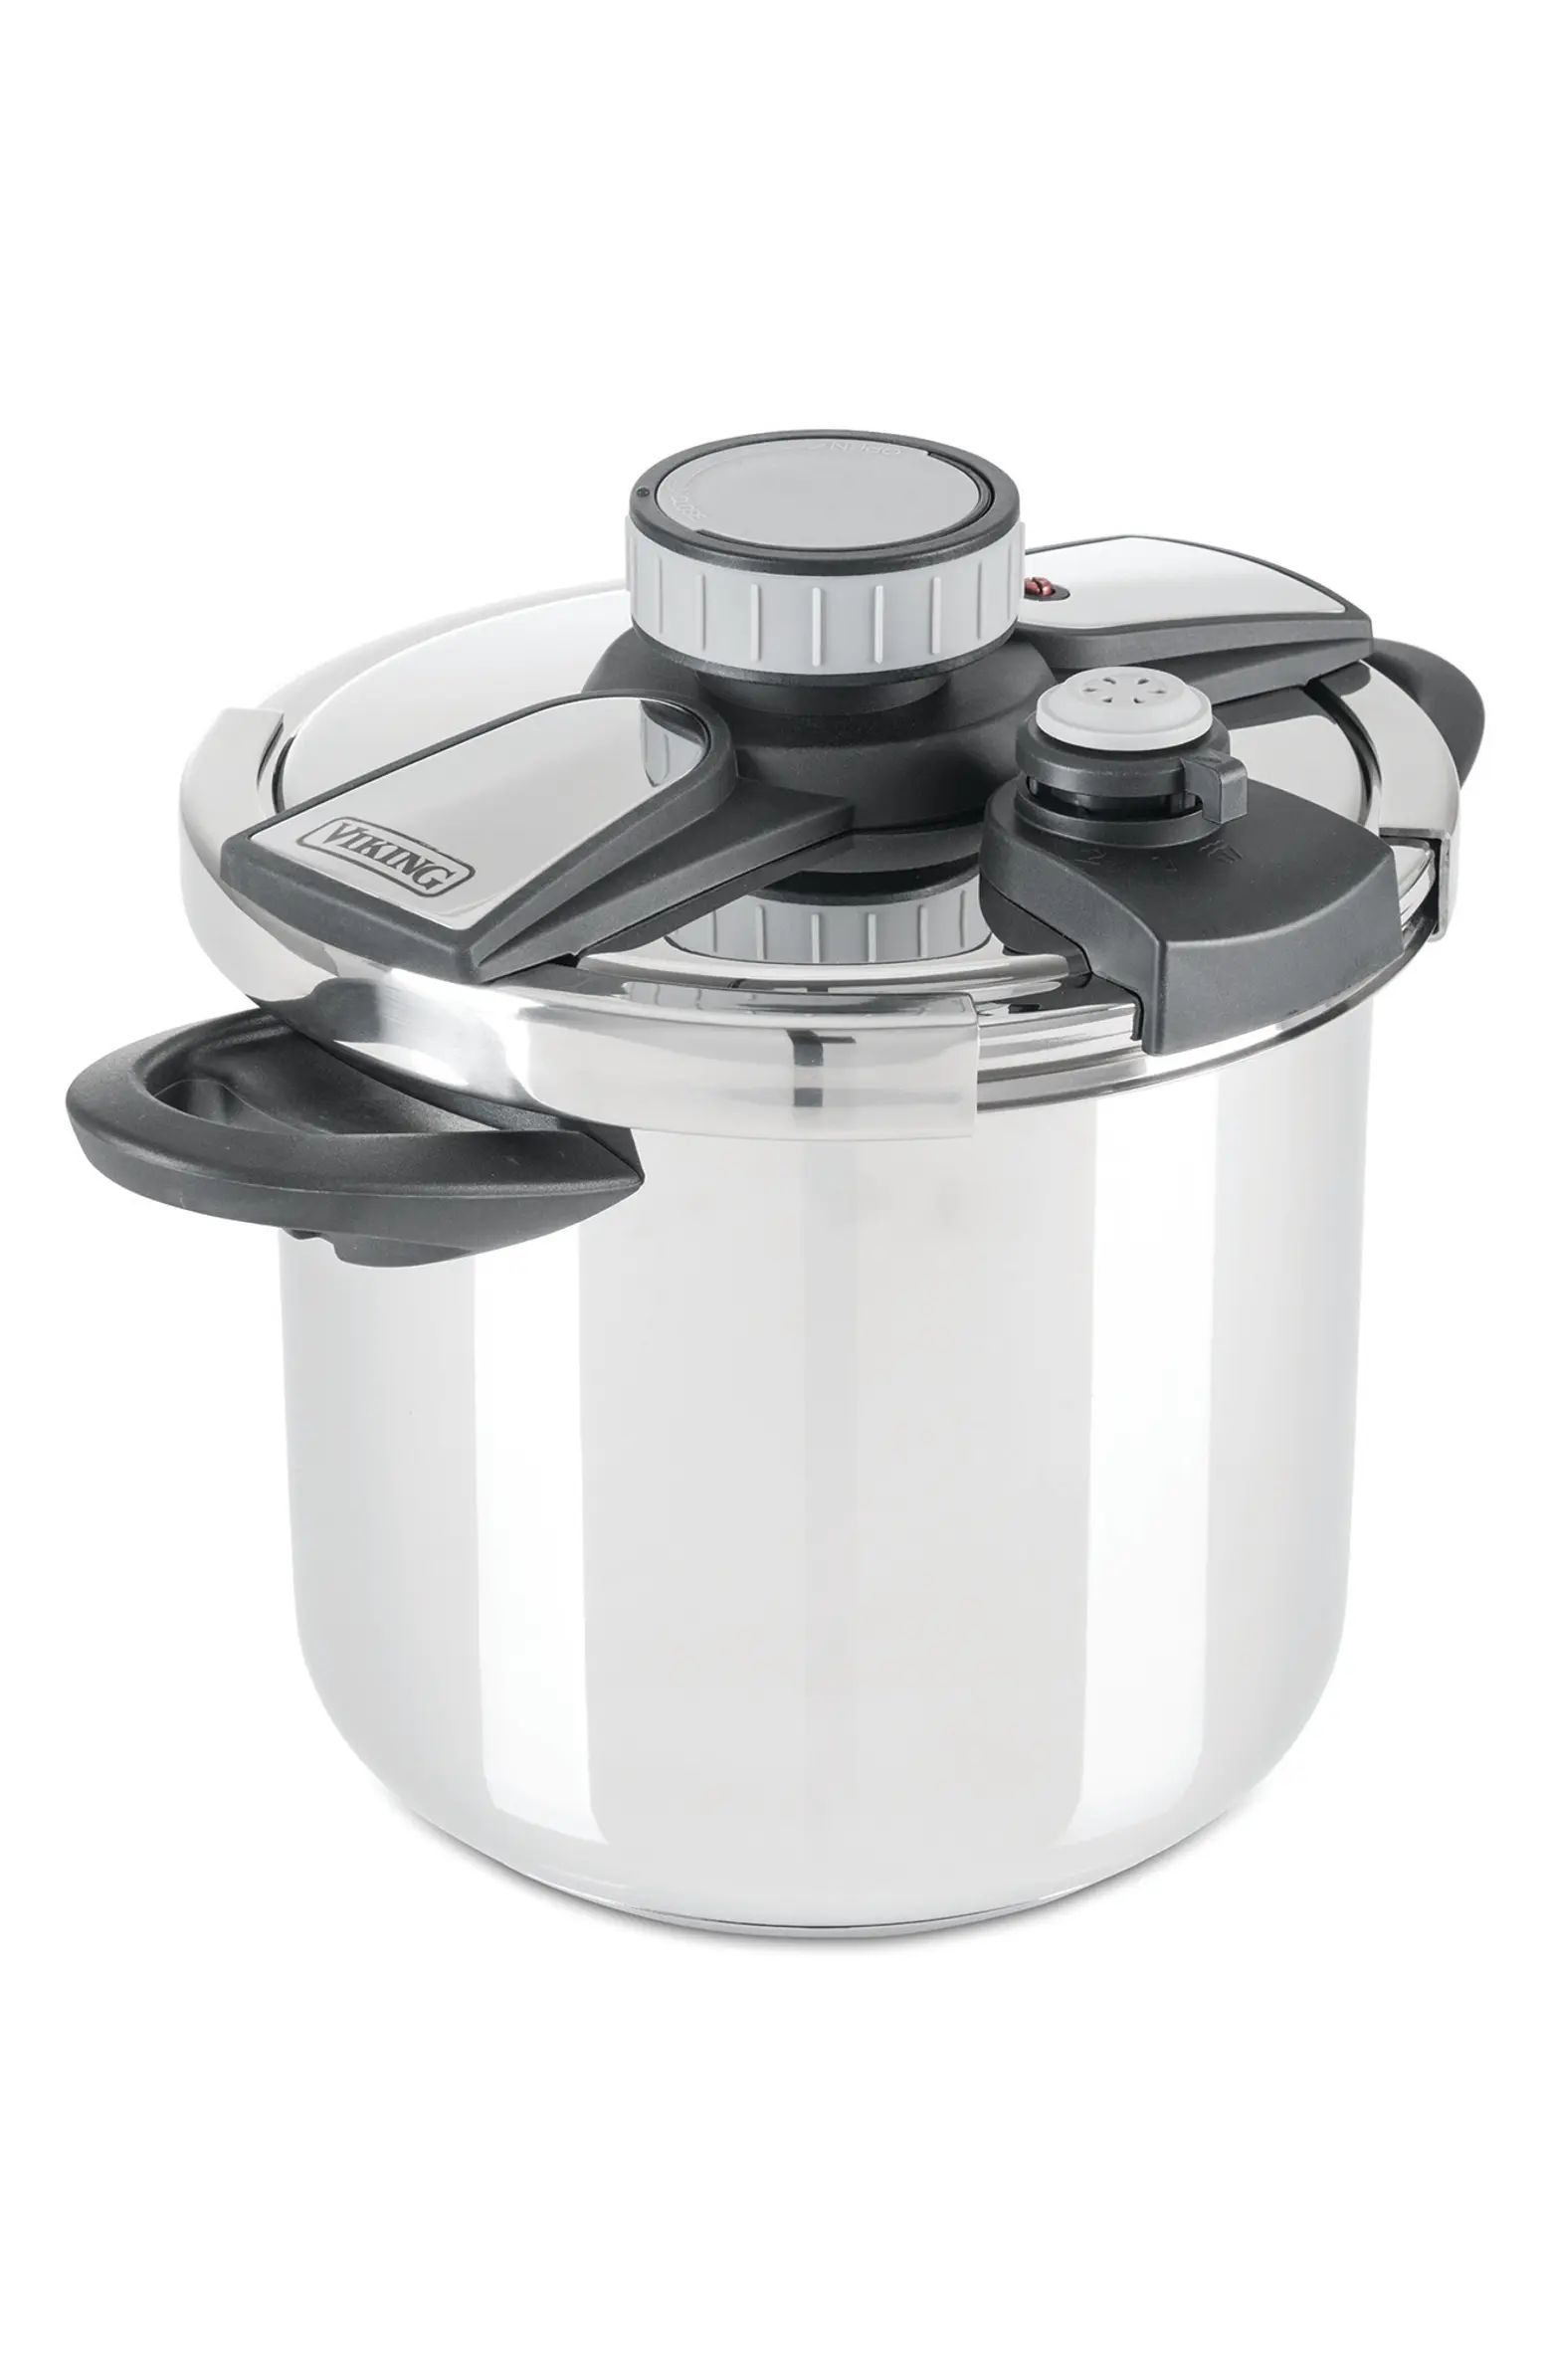 Easy Lock Clamp 8-Quart Pressure Cooker with Steamer | Nordstrom